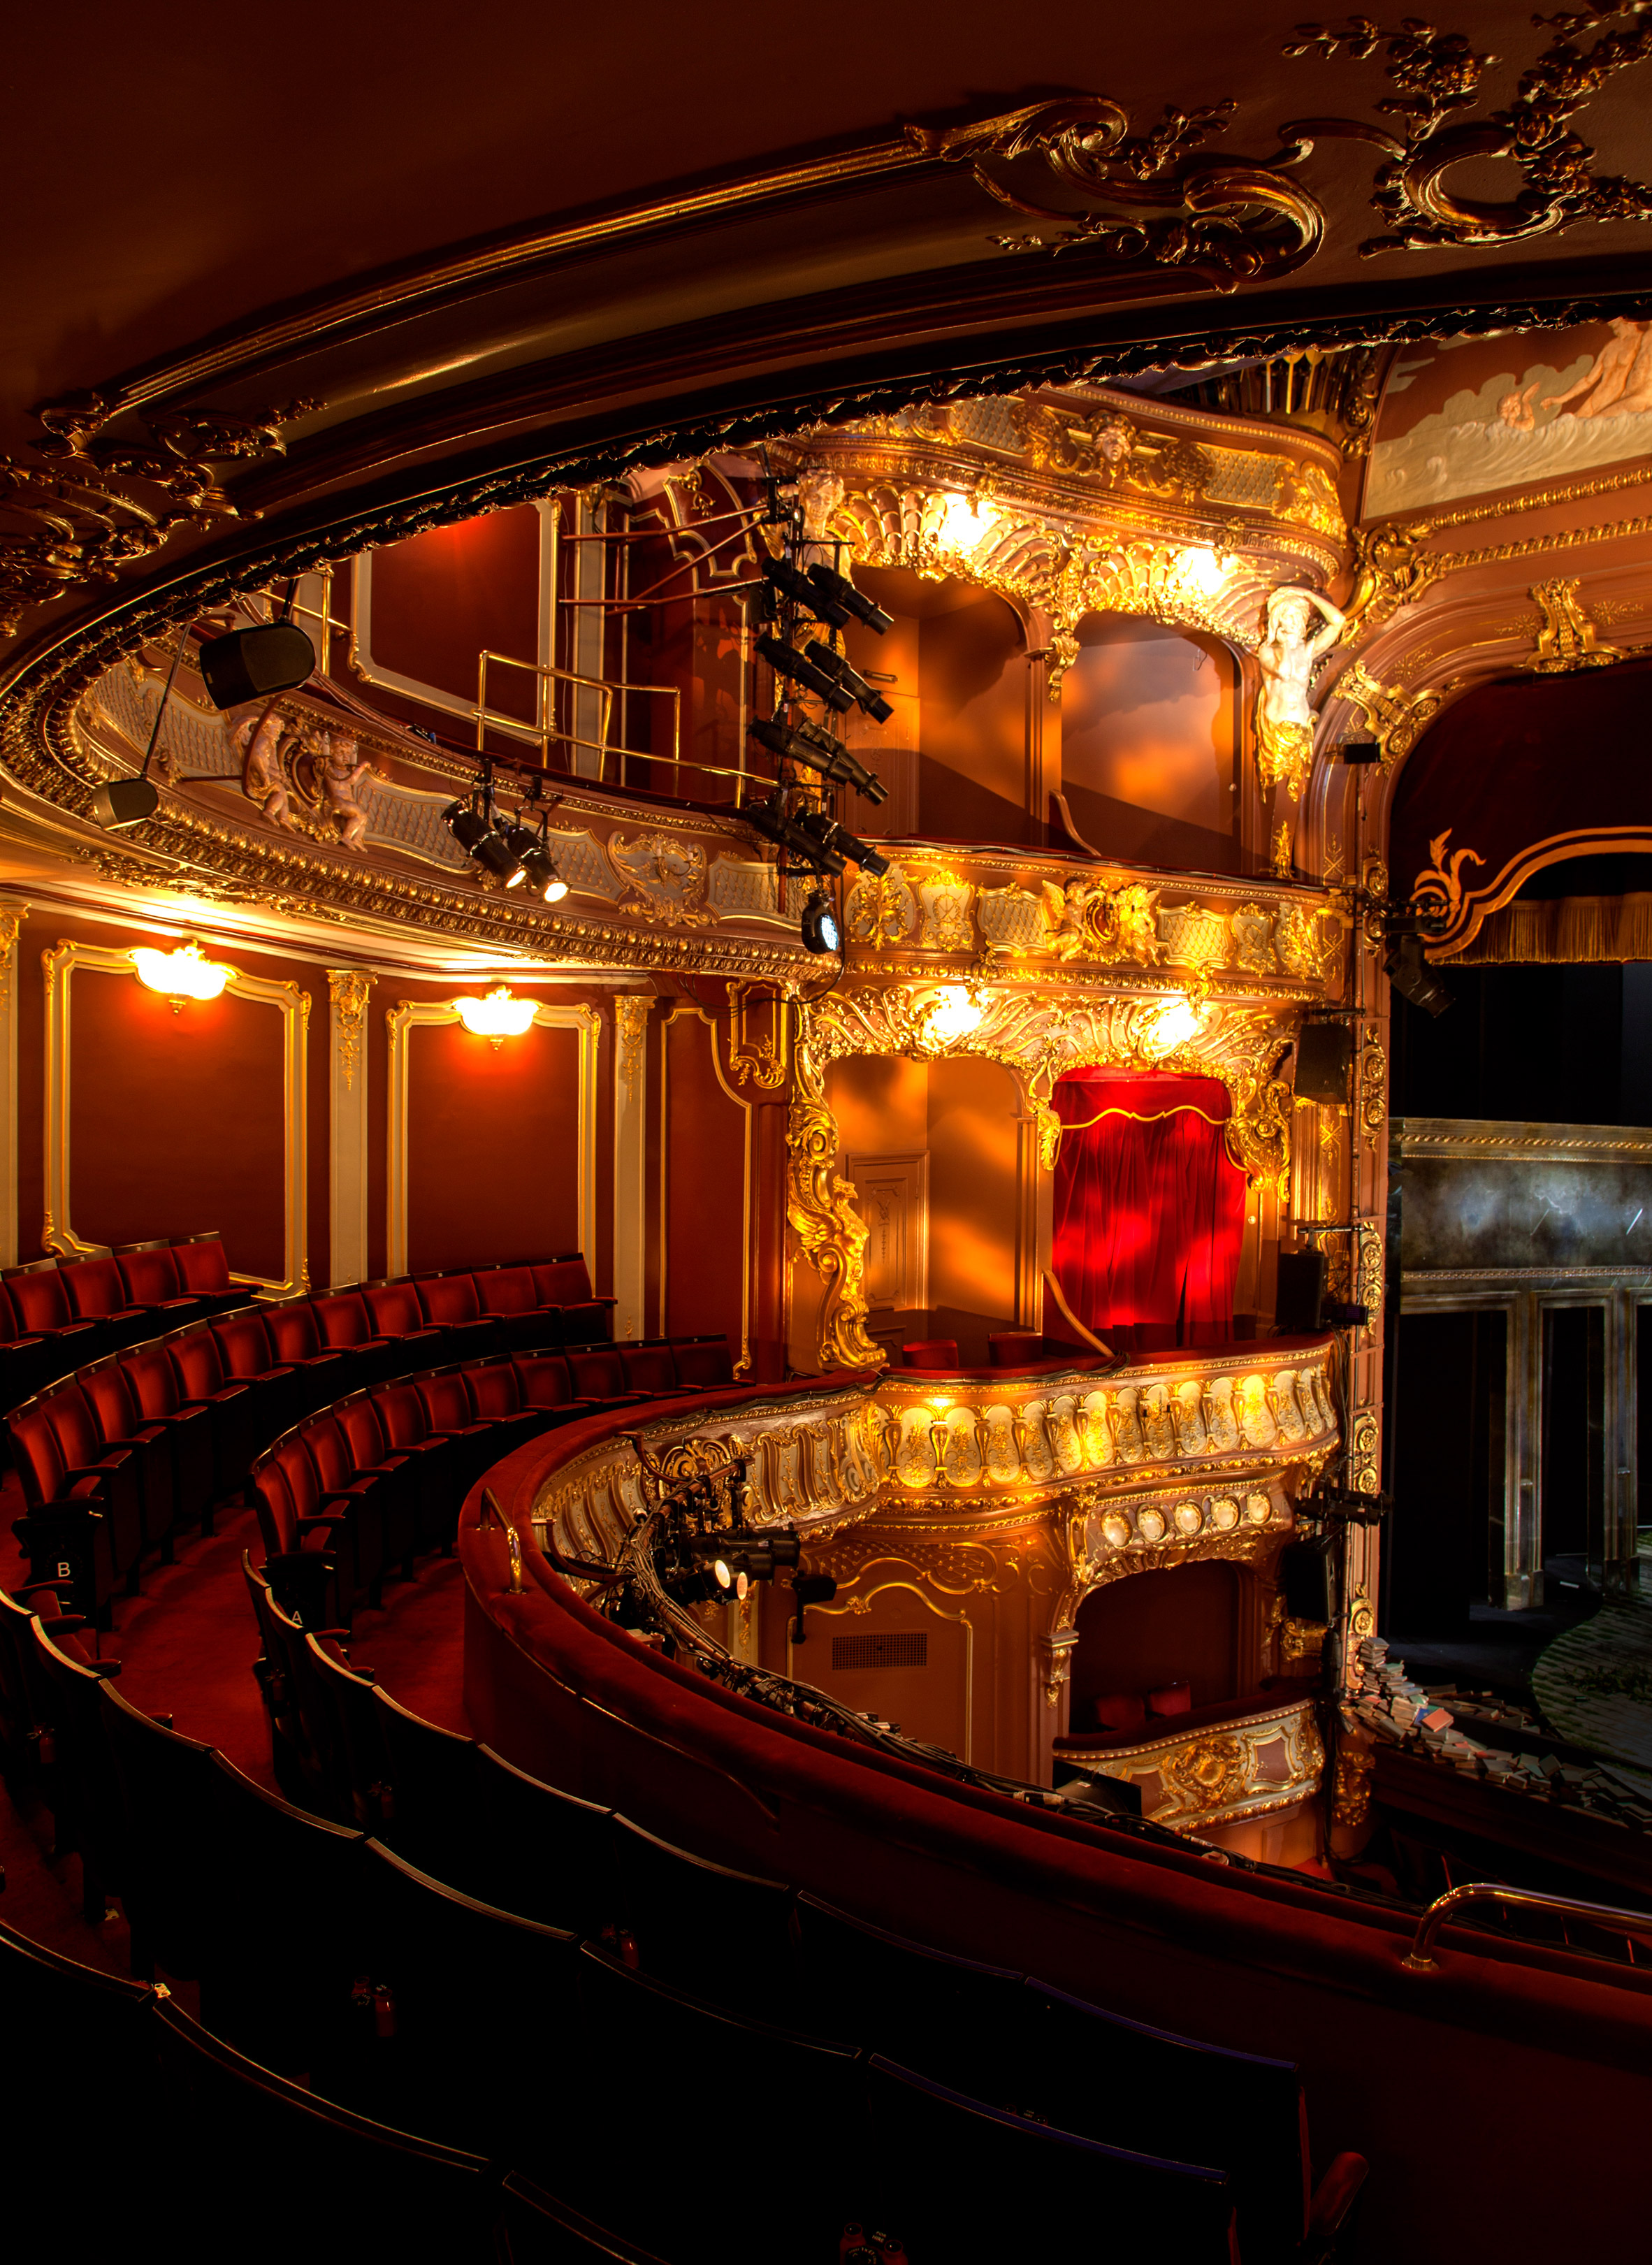 London's Great Theatres book by Simon Callow and Derry Moore for Prestel